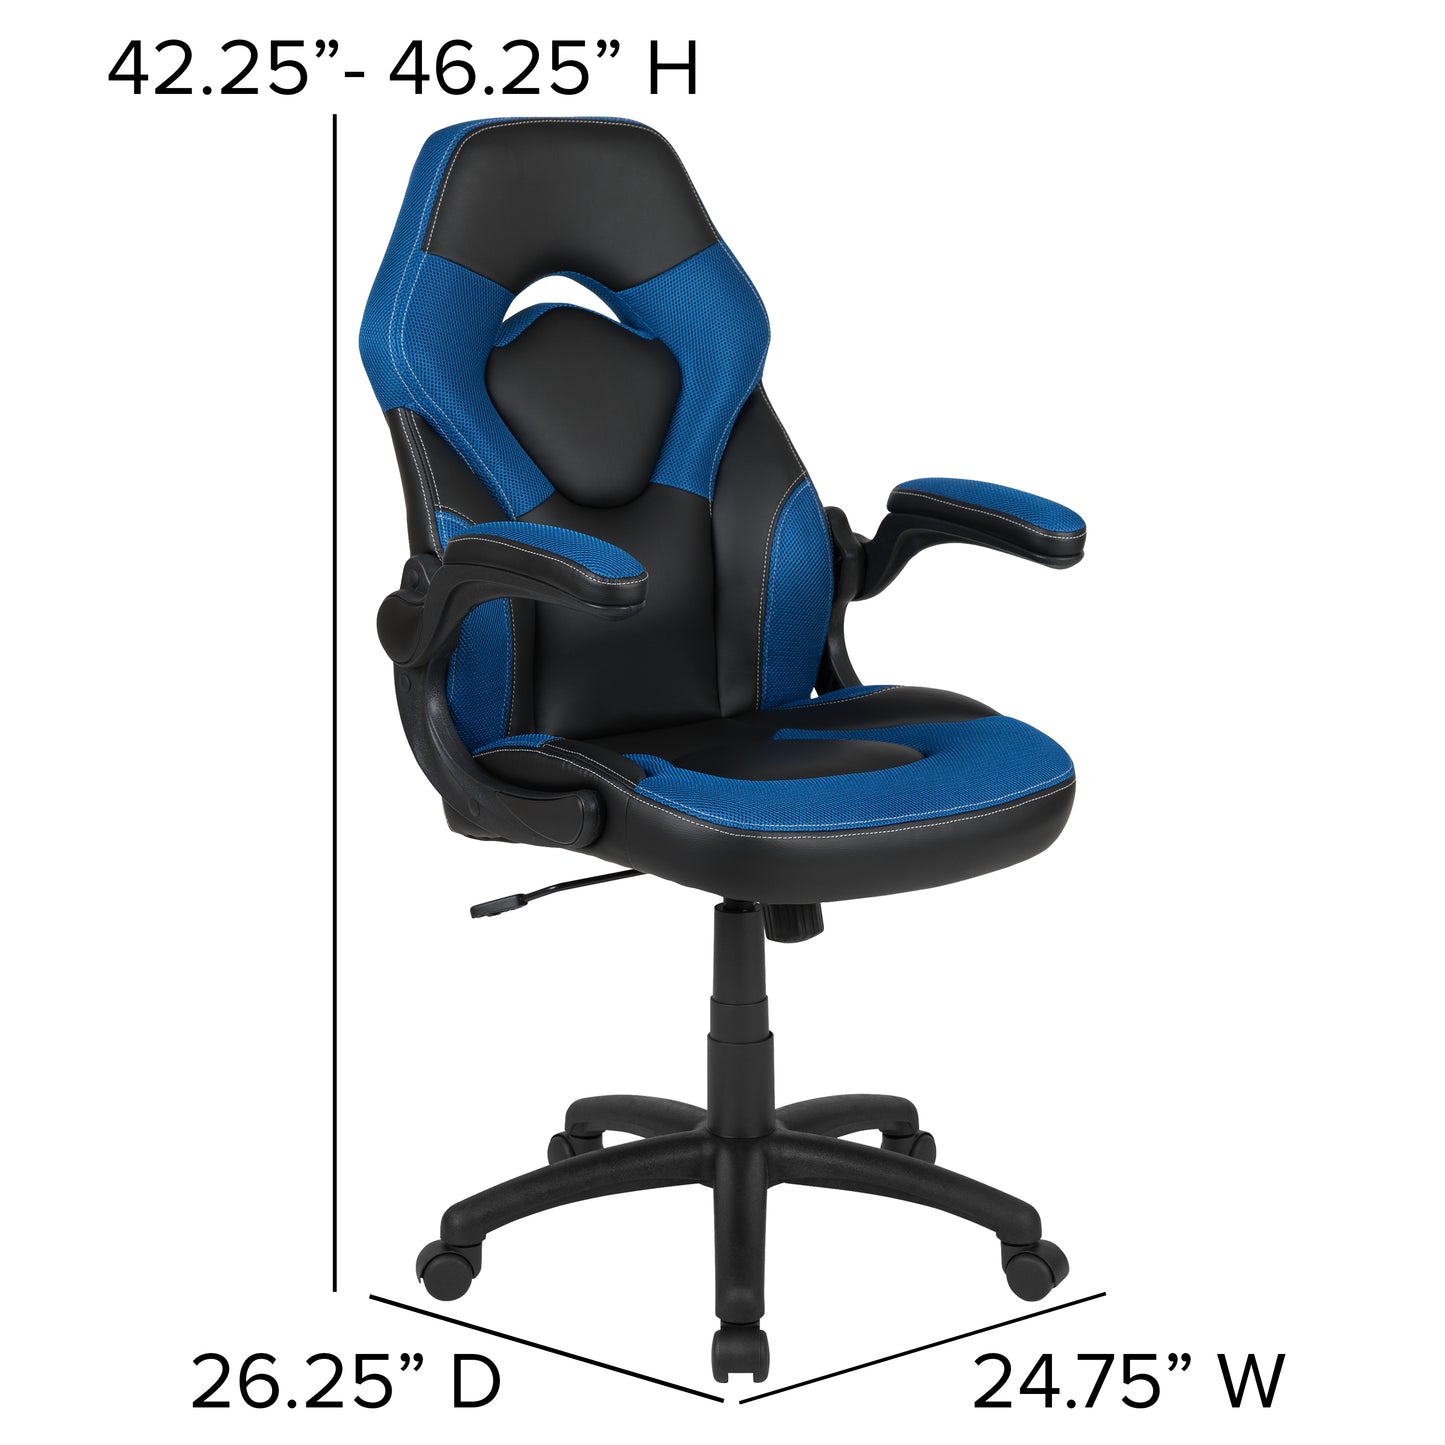 Optis Gaming Desk with Blue Chair